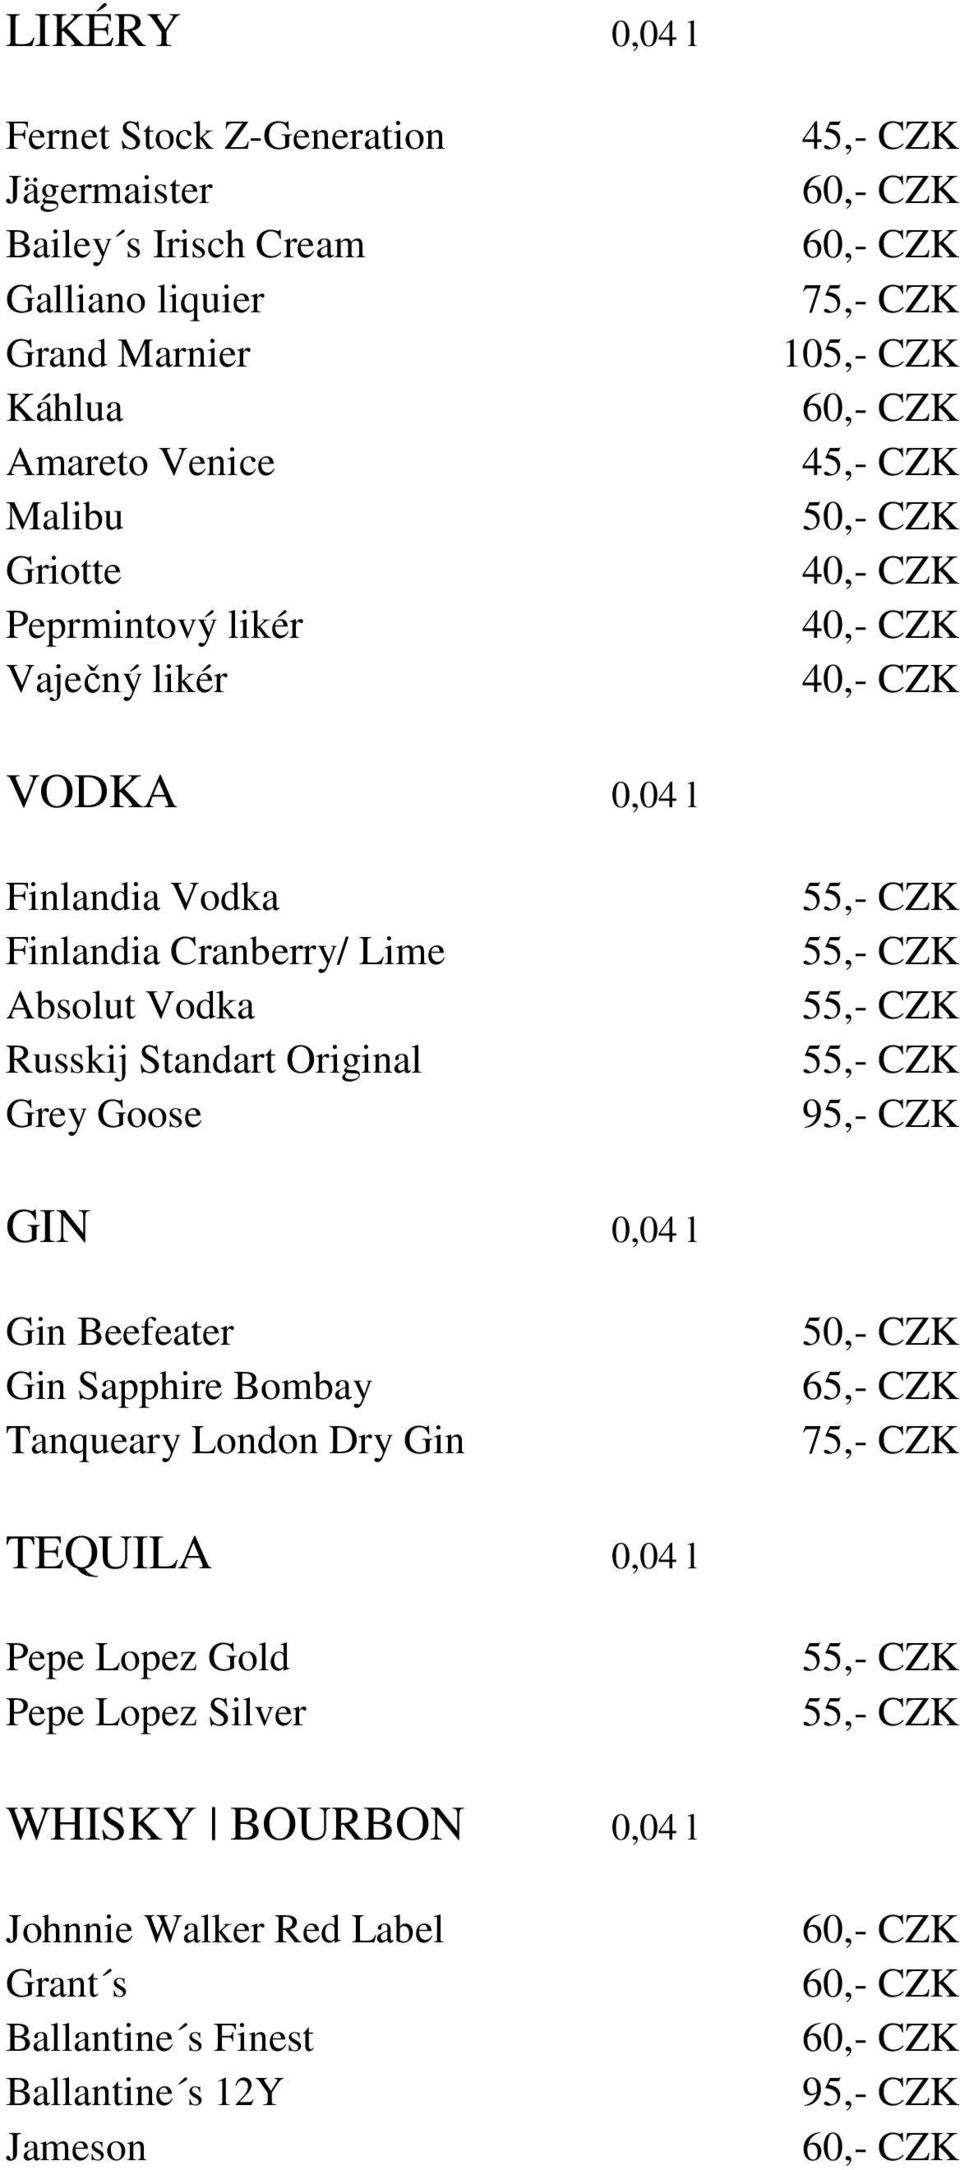 Lime Absolut Vodka Russkij Standart Original Grey Goose GIN Gin Beefeater Gin Sapphire Bombay Tanqueary London Dry Gin 75,- CZK